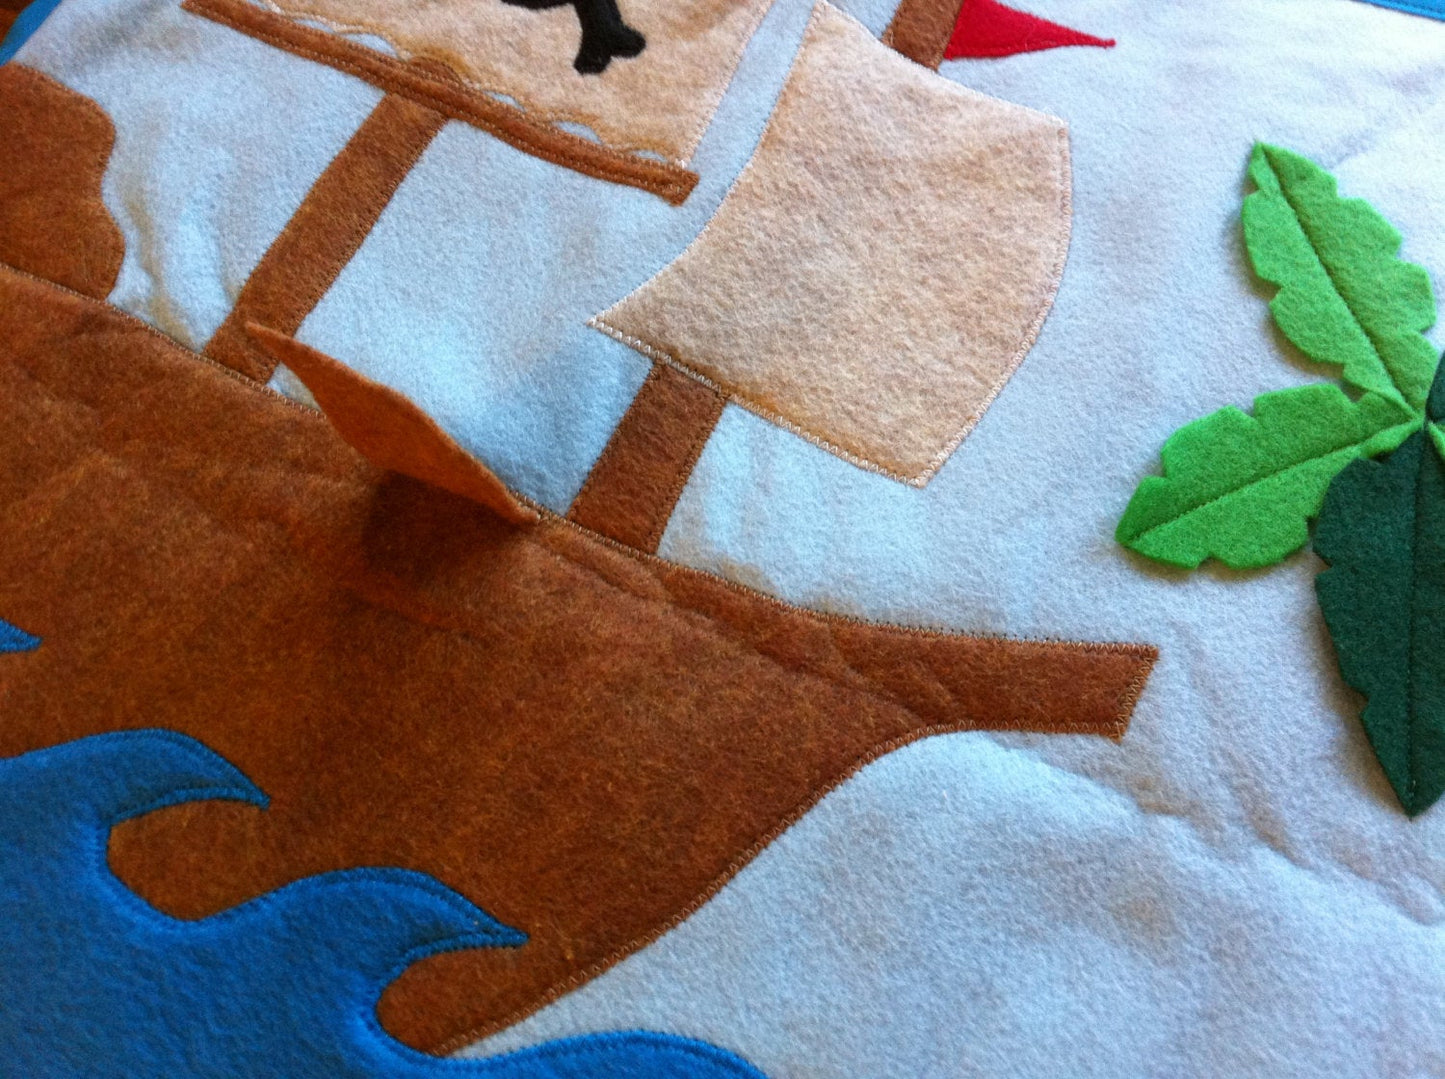 Felt Pirate Play Mat: A Roll-Up Felt Board with Pirate Toys